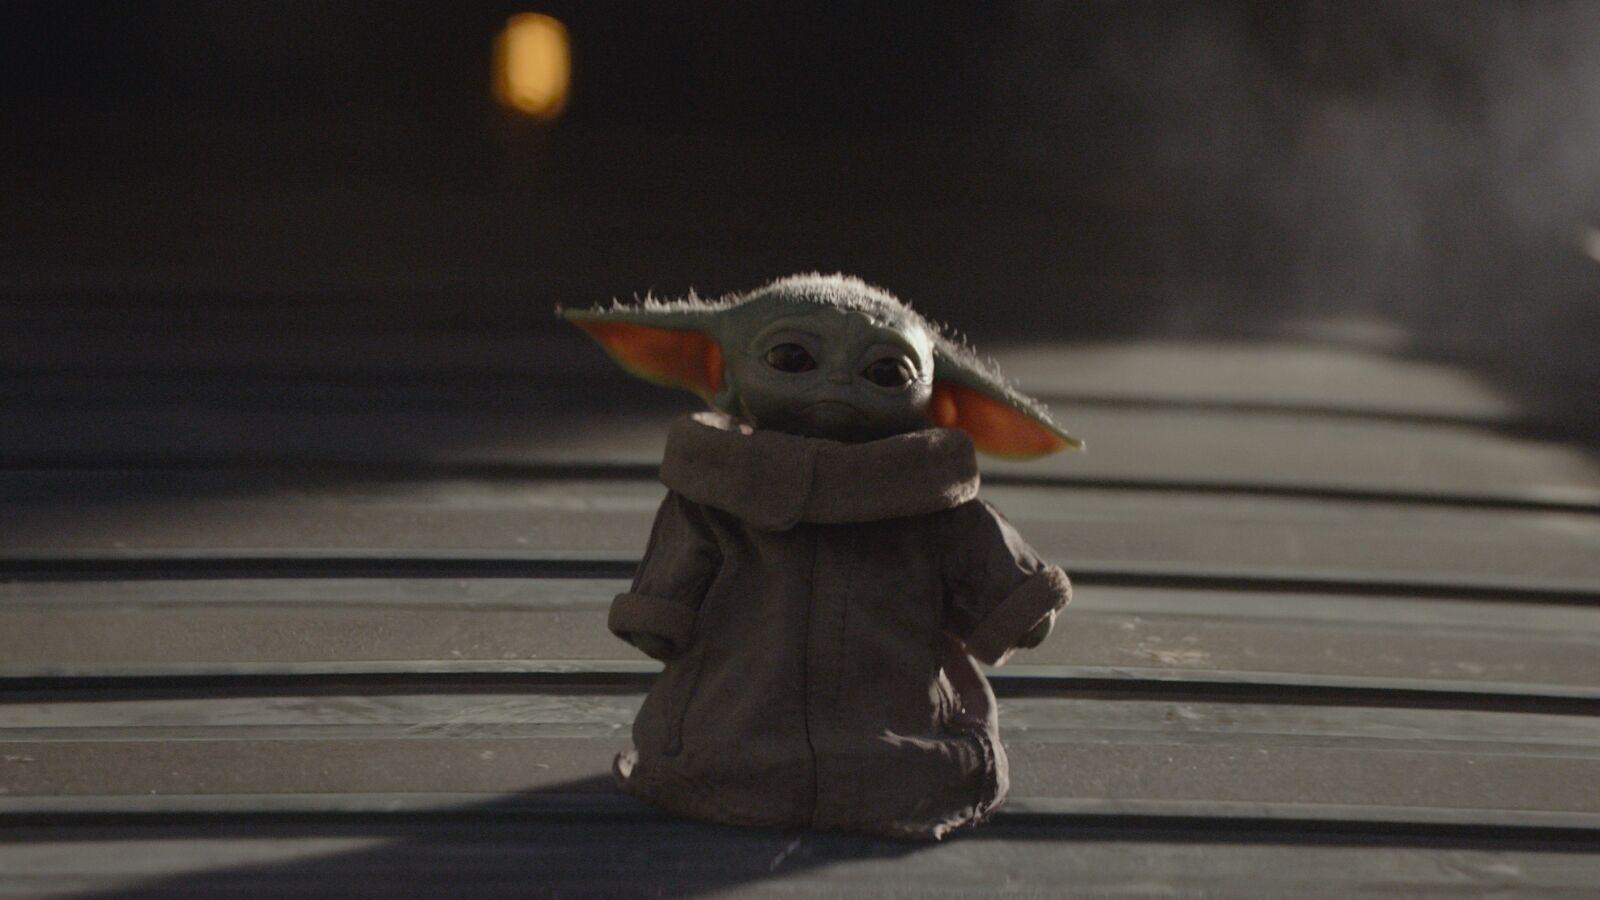 The Mandalorian: Let's talk about Baby Yoda in Chapter 7